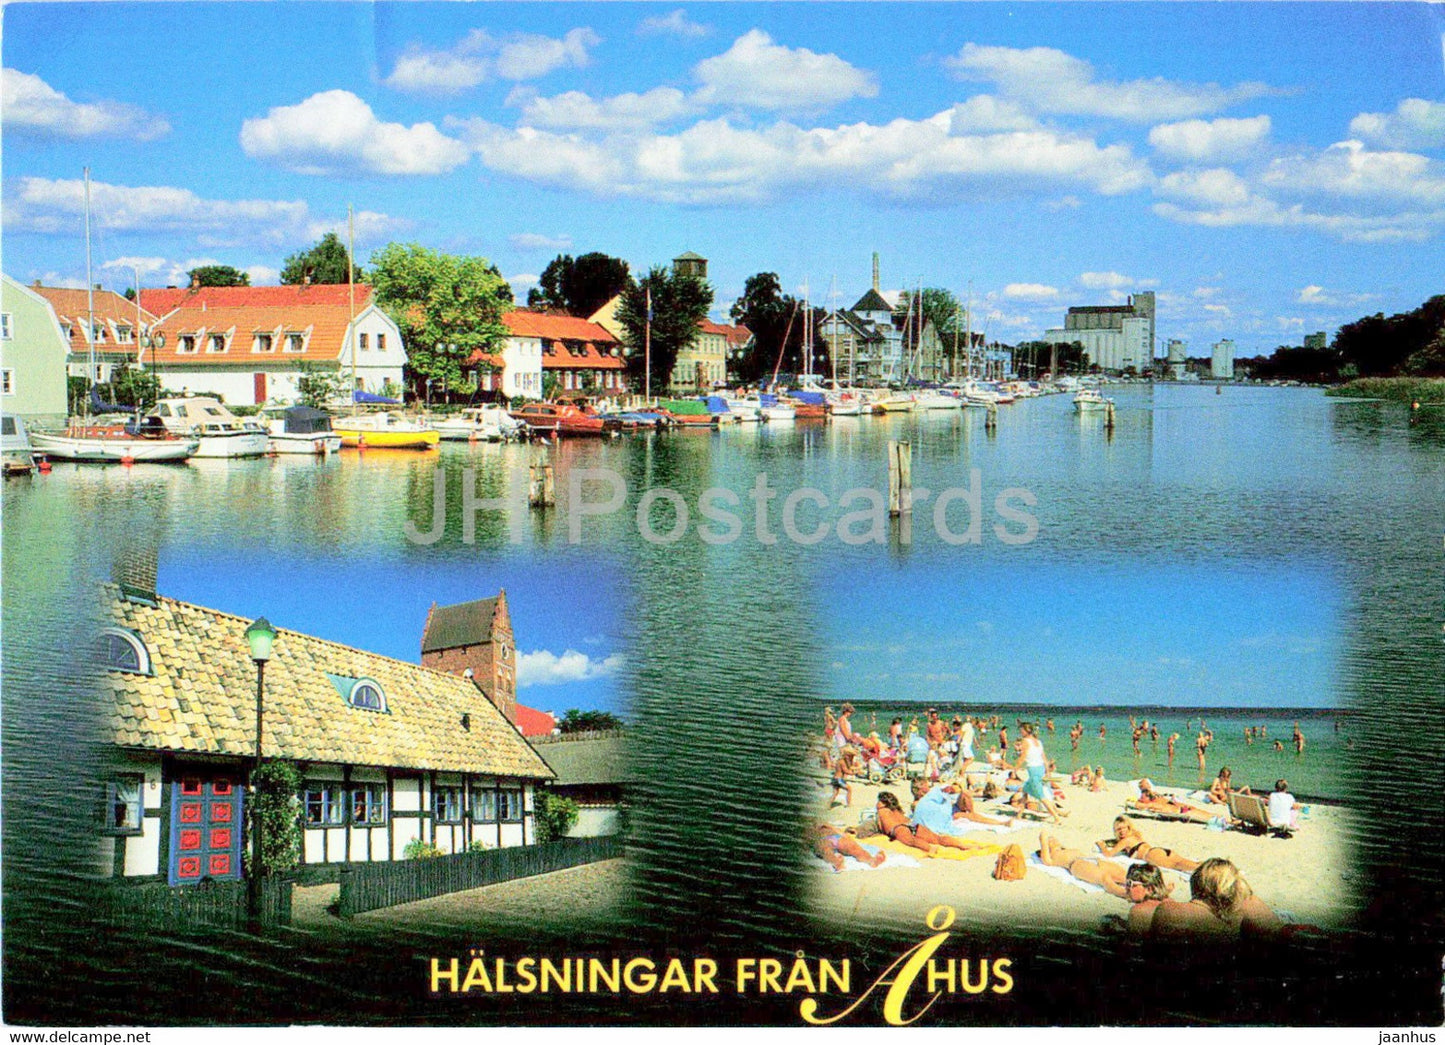 Greetings from Ahus - boat - beach - Sweden - used - JH Postcards